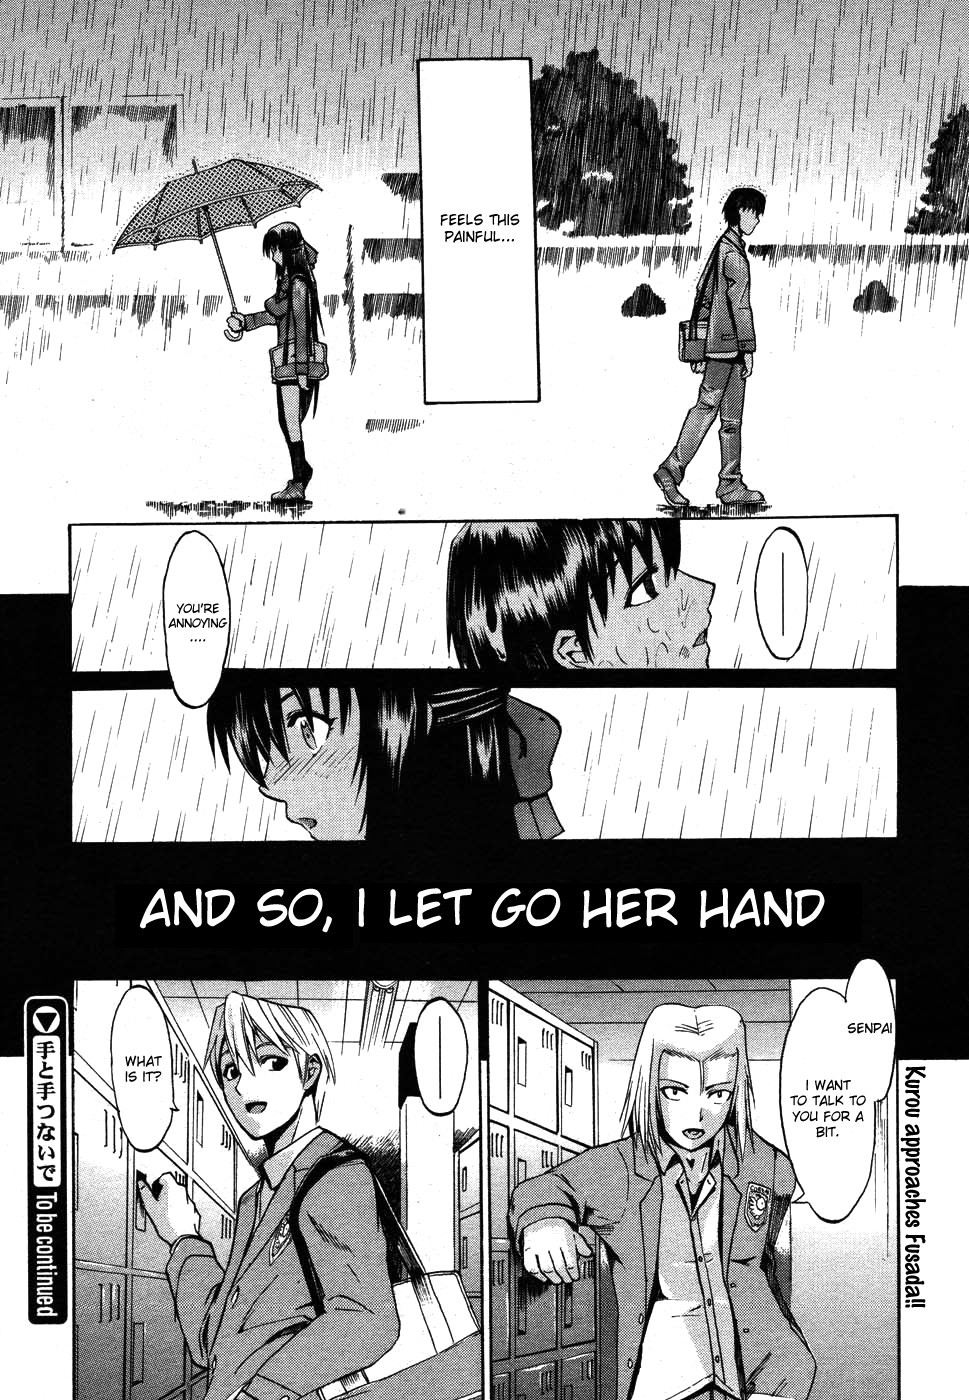 When you let go of my hands 43 hentai manga